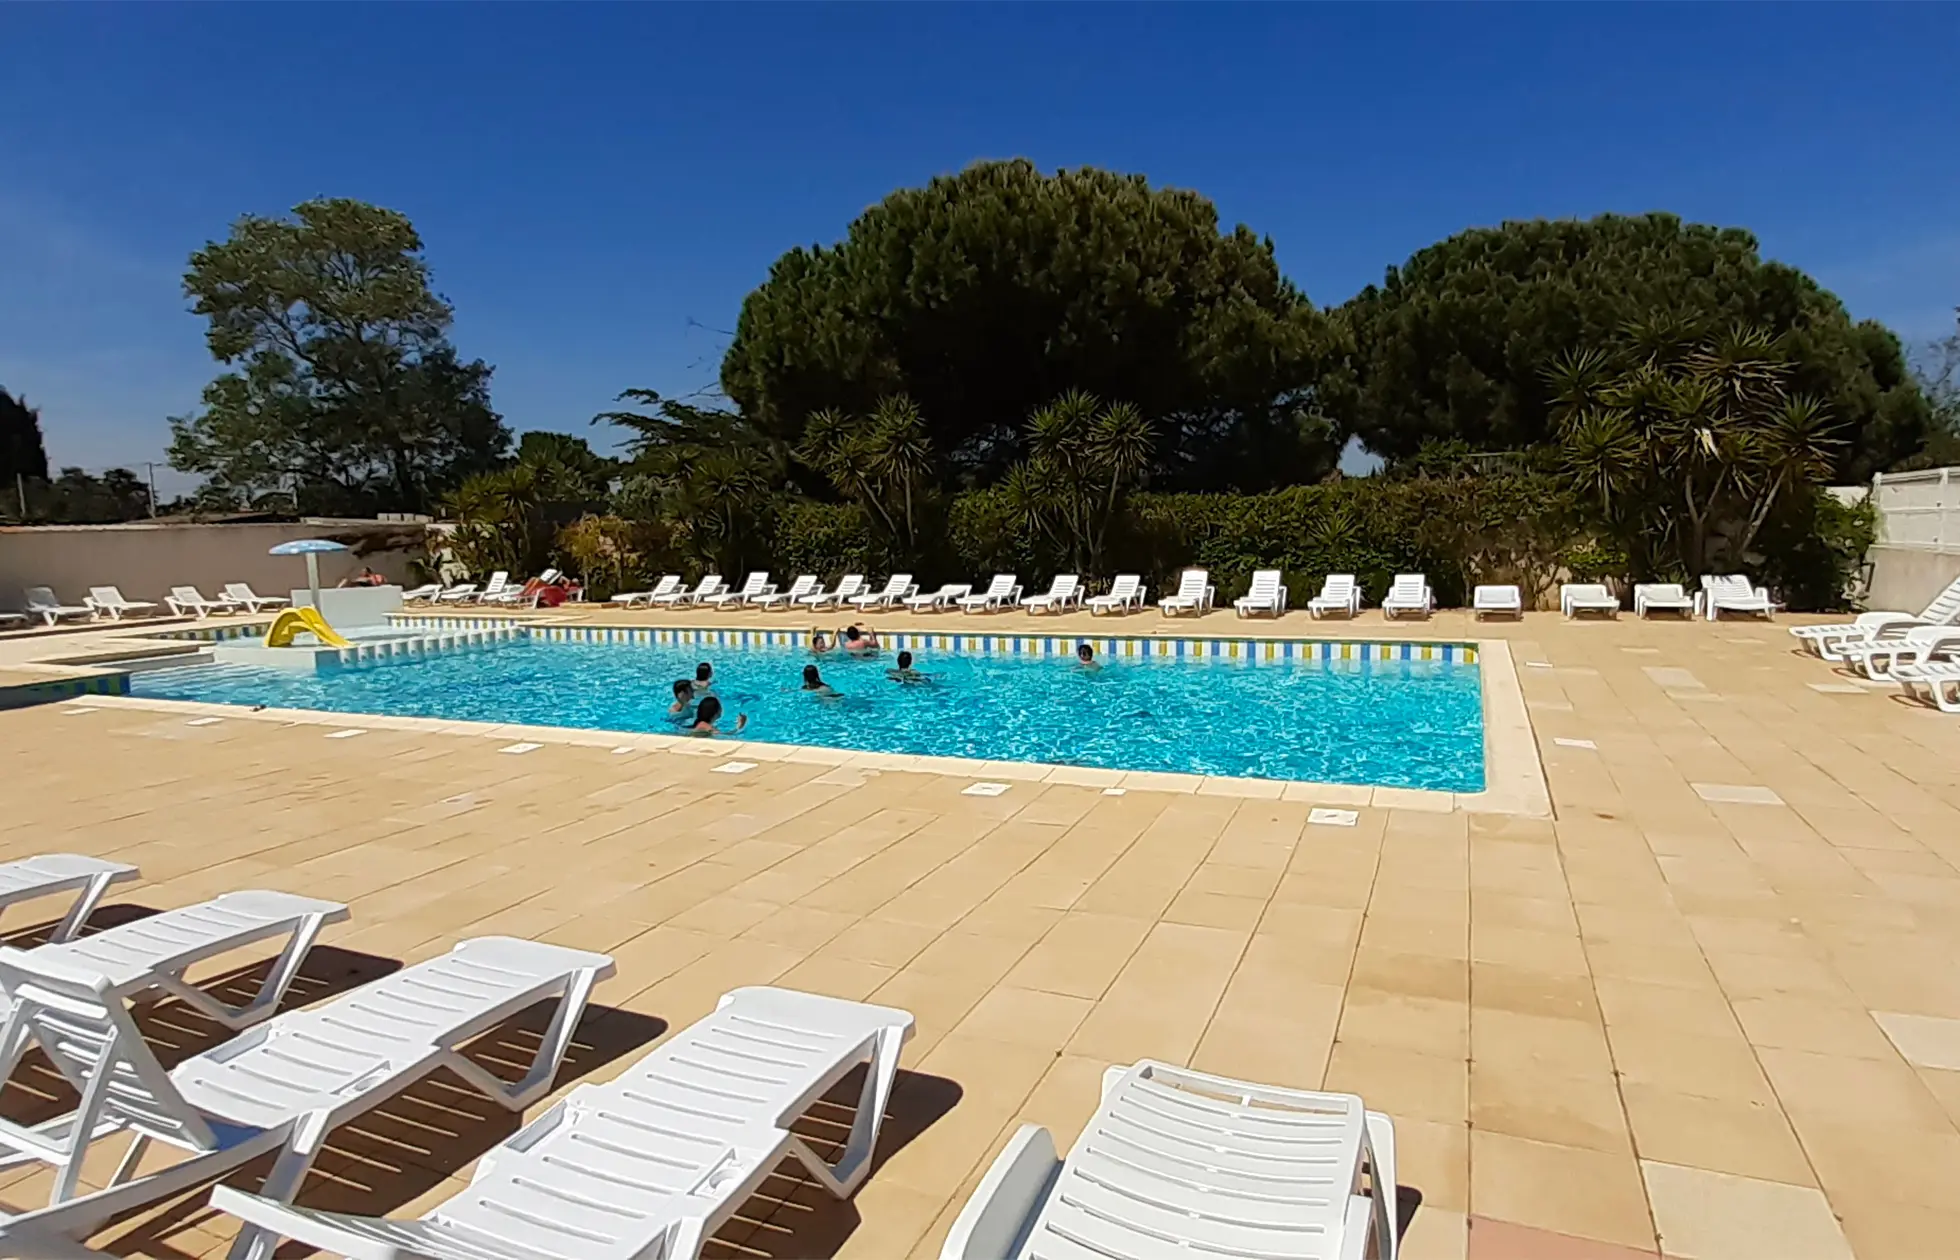 offer ' - '08 - Camping Le Rochelongue - Piscine